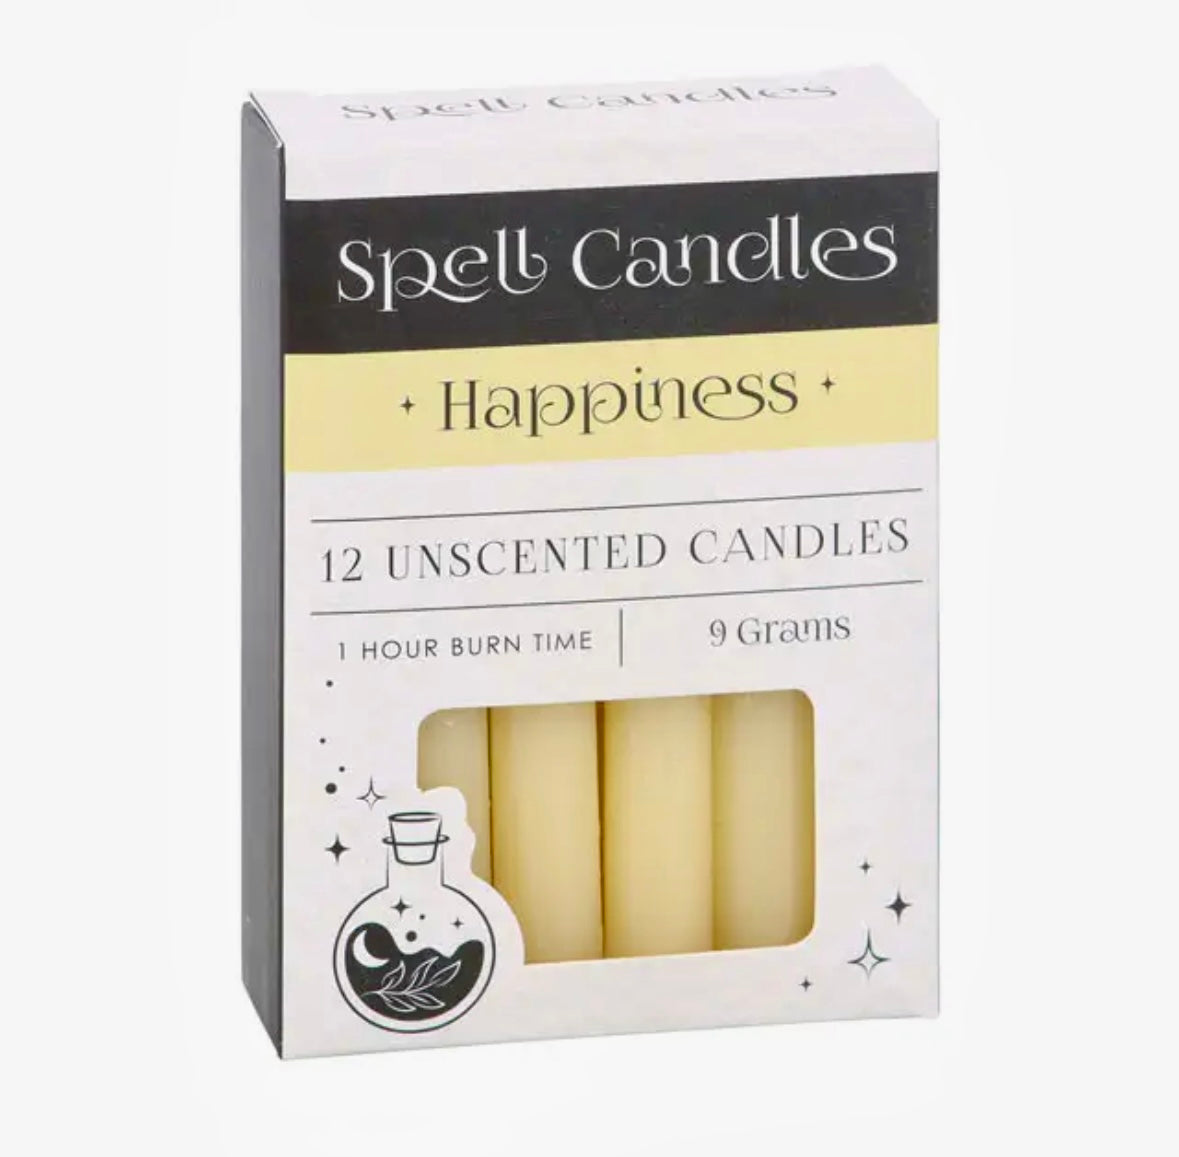 Gul ☾ Magic SPELL CANDLES ☾ For glæde